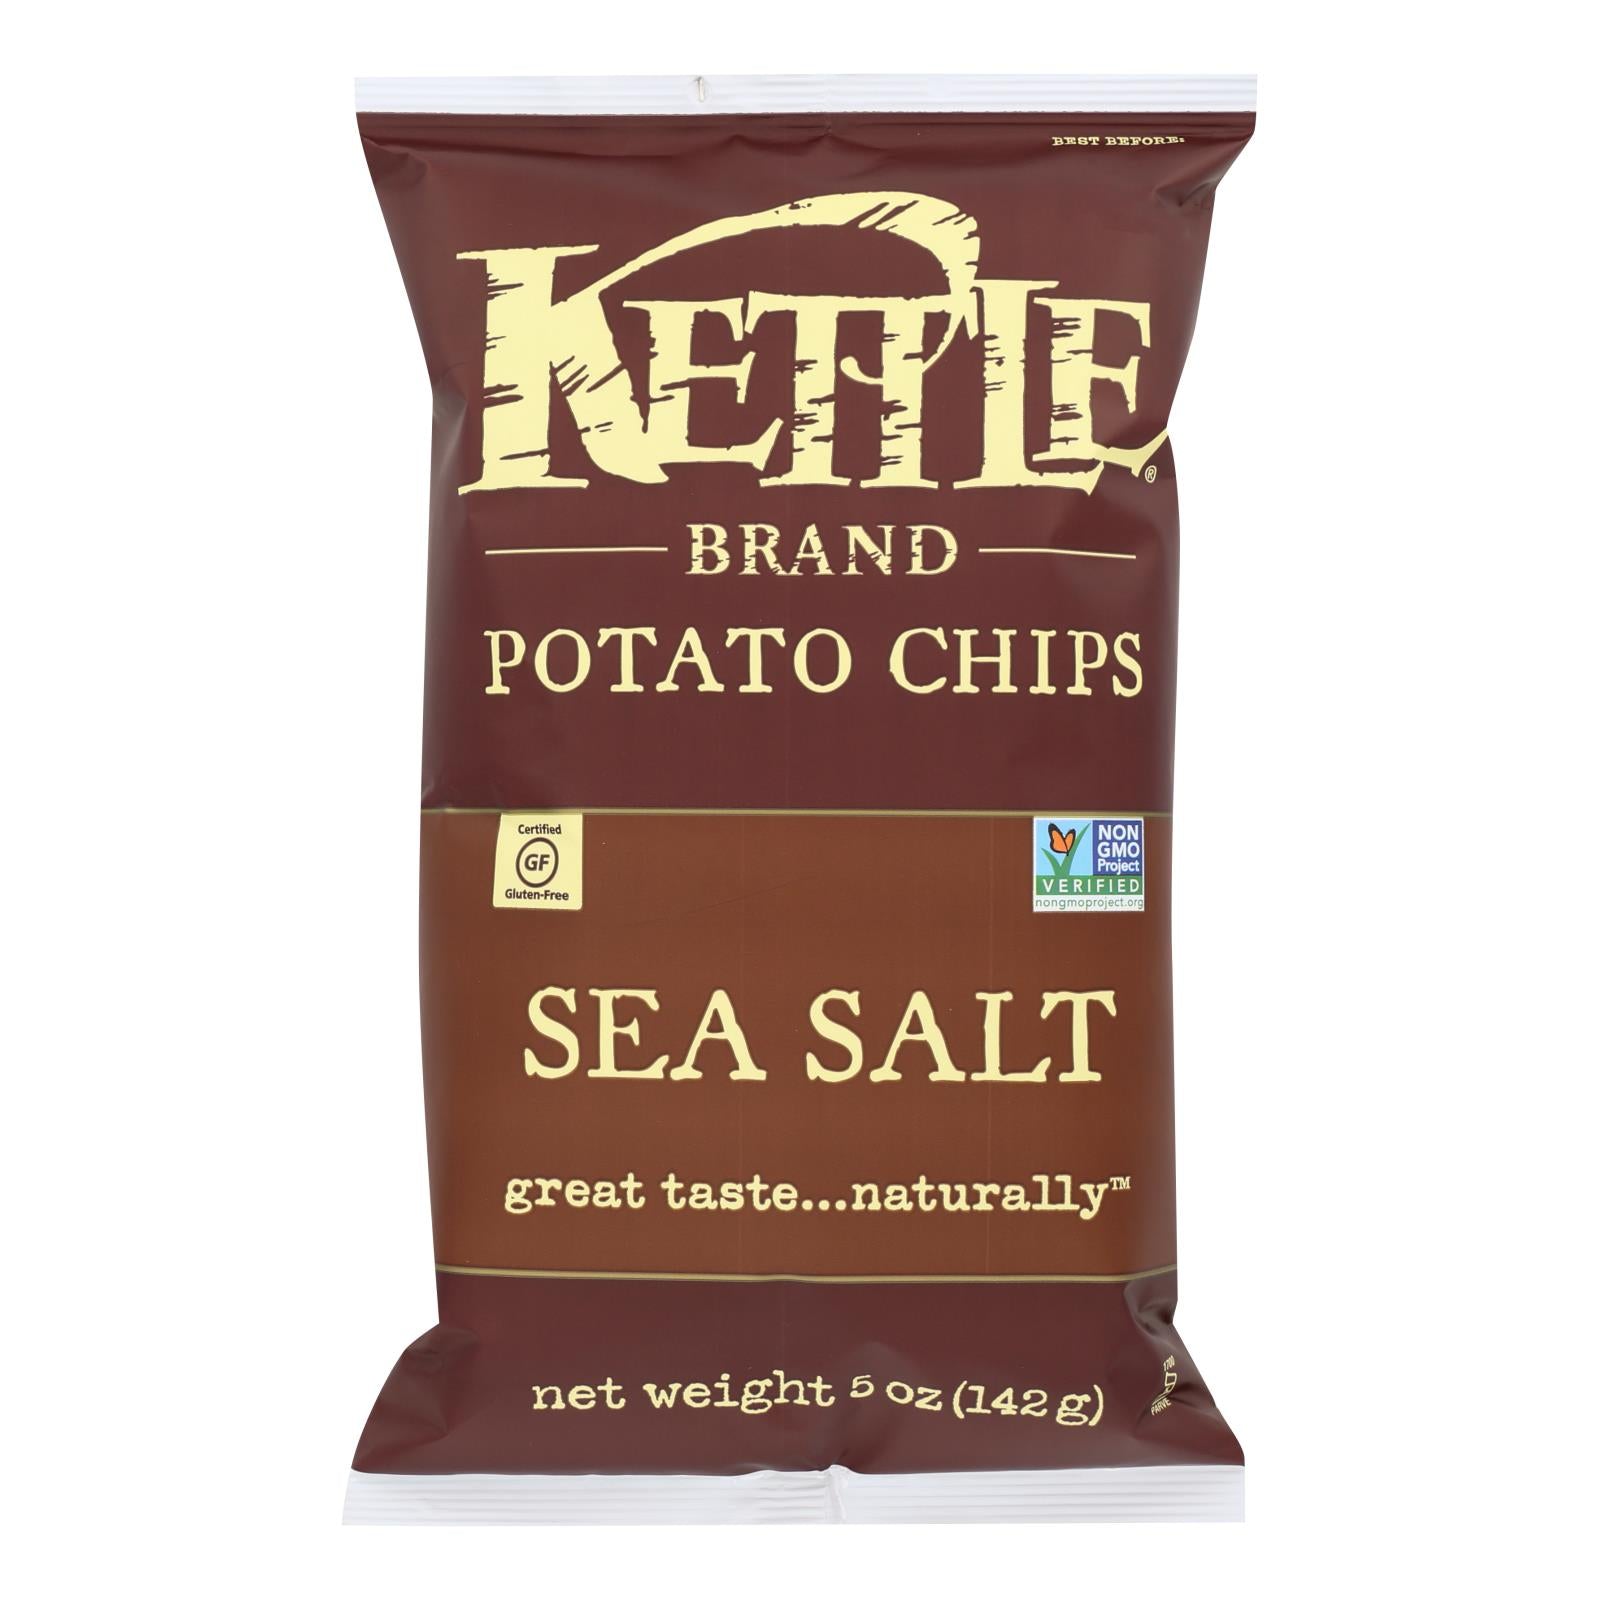 Our Products - Kettle Brand